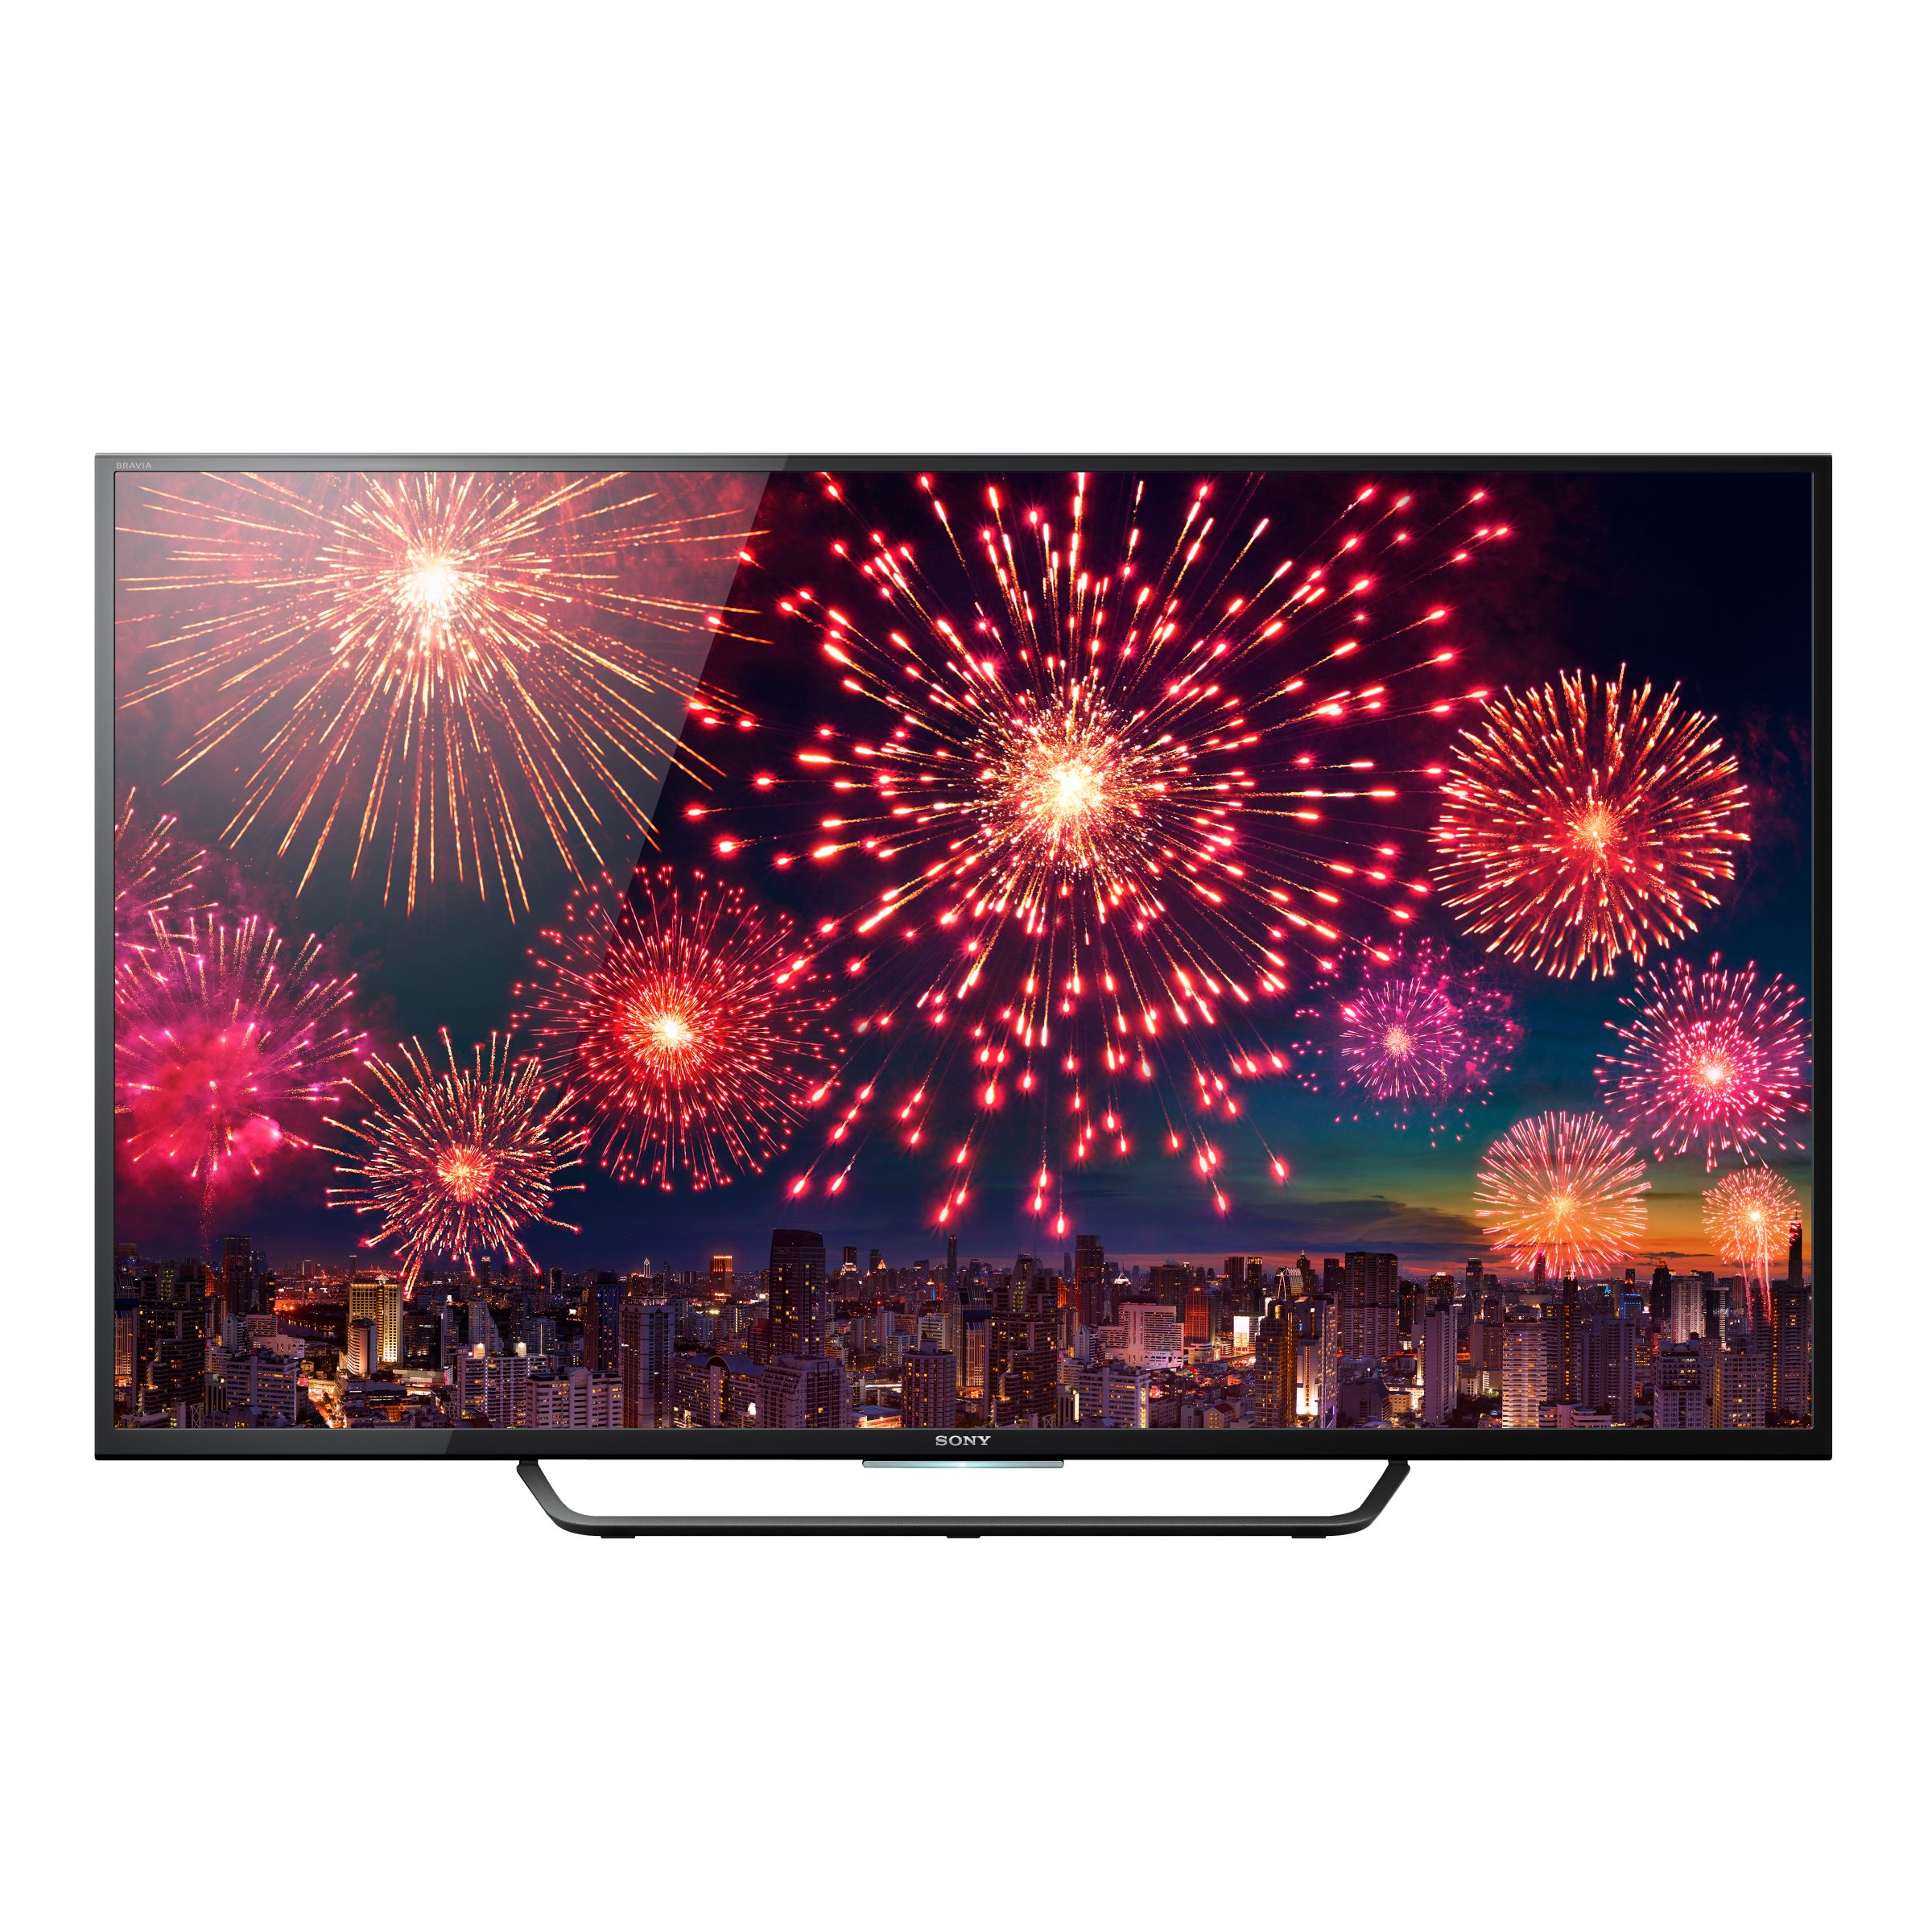 Sony Bravia KD49X8005 4K Ultra HD LED Android TV, 49